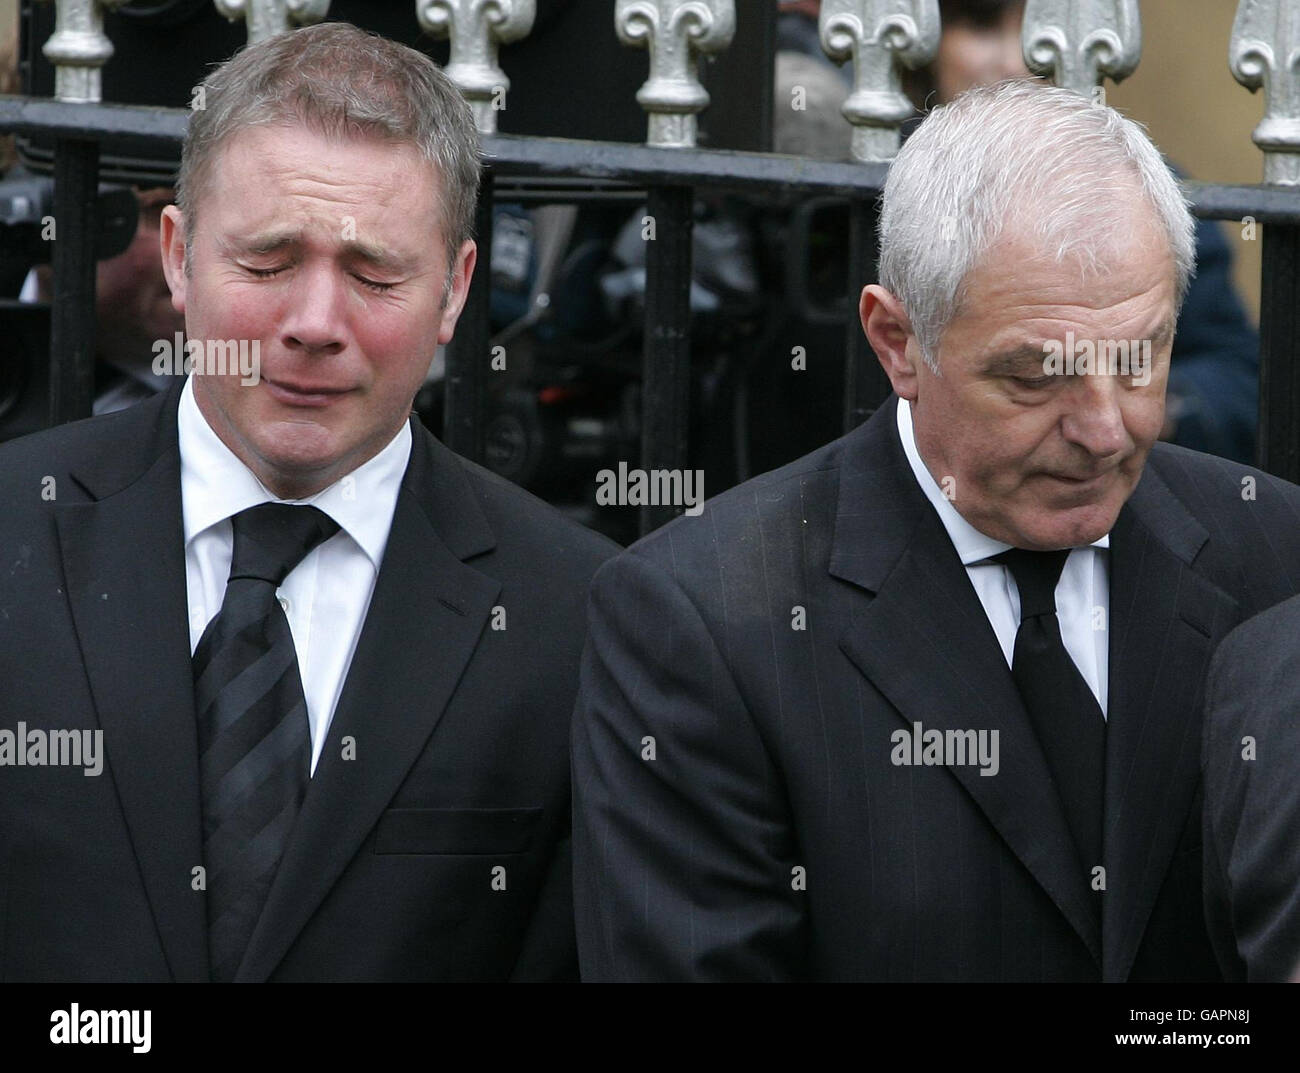 Glasgow rangers assistant manager ally mccoist following the funeral of ...